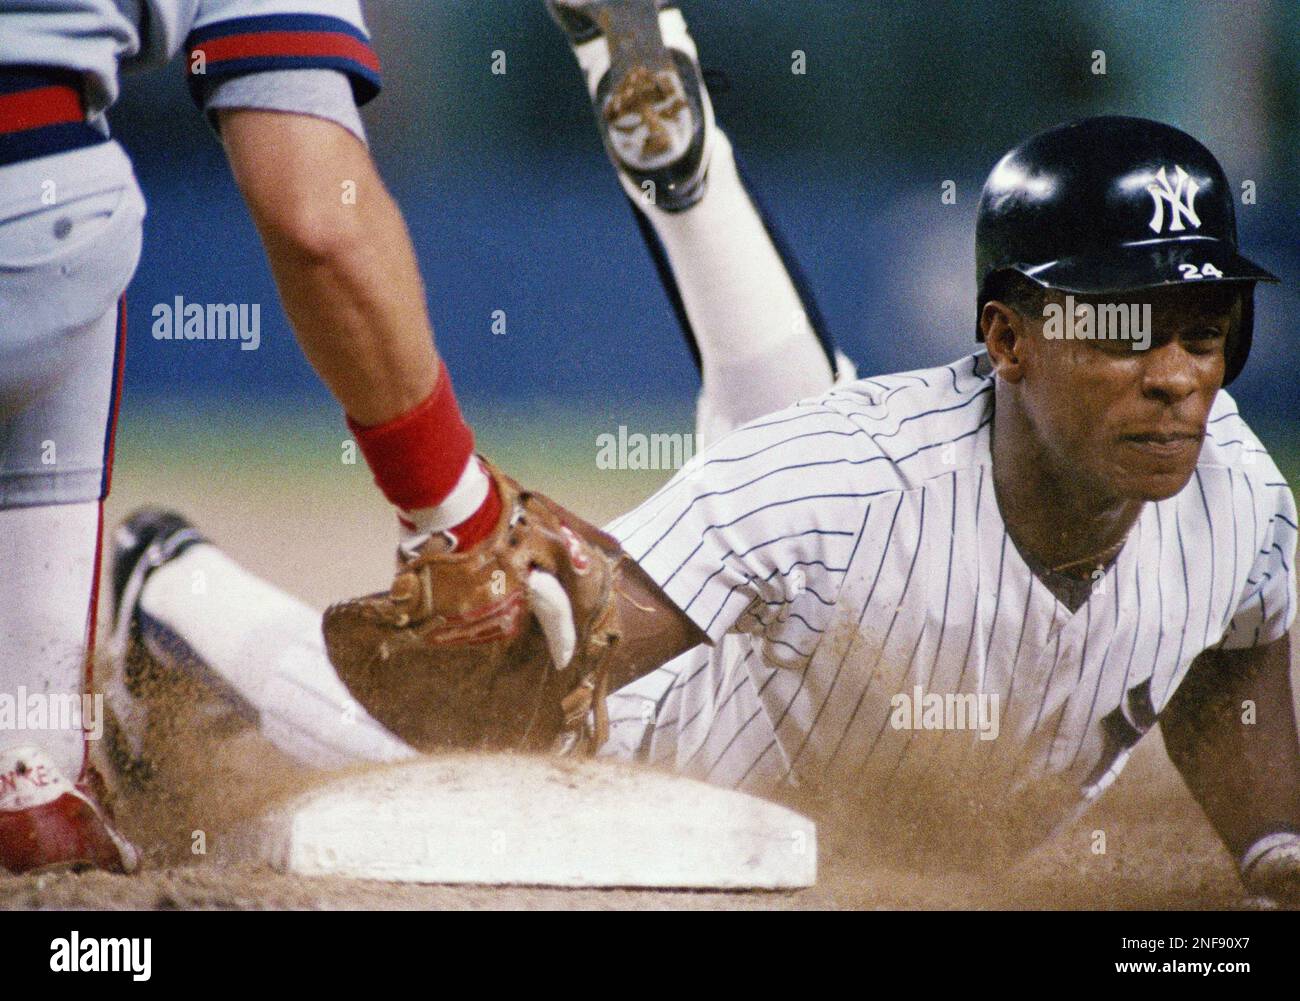 Rickey Henderson of the New York Yankees gets back to the bag avoiding the  glove of California Angels first baseman Wally Joyner in the first inning  at Yankee Stadium, Aug. 17, 1988.